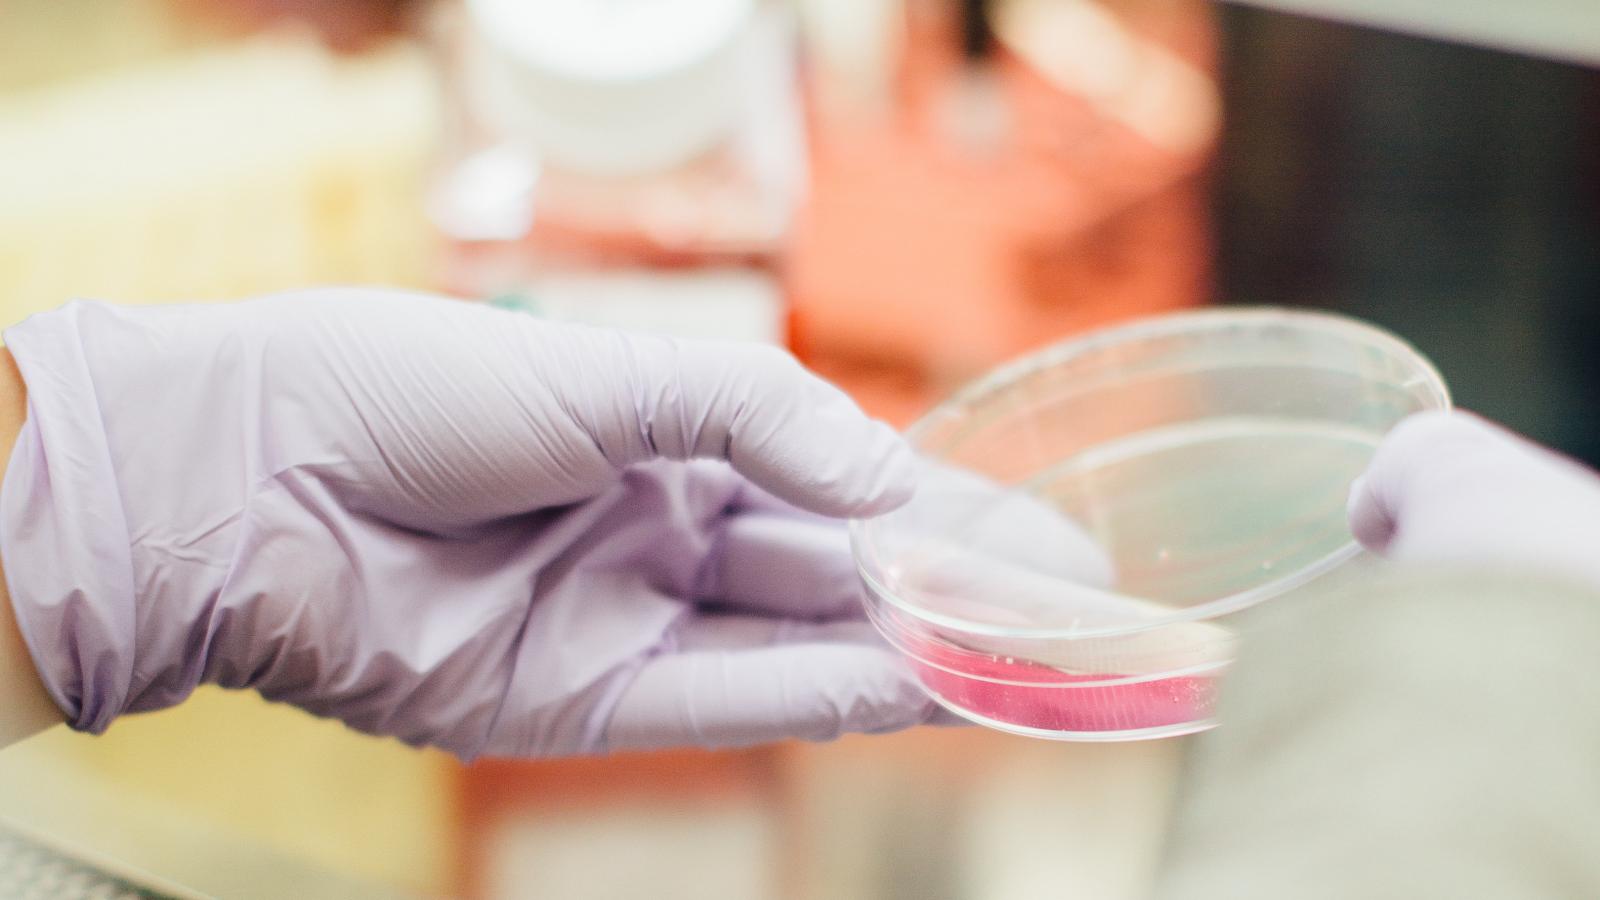 a gloved hang holding a medical research dish (petri dish) with pink liquid in it.